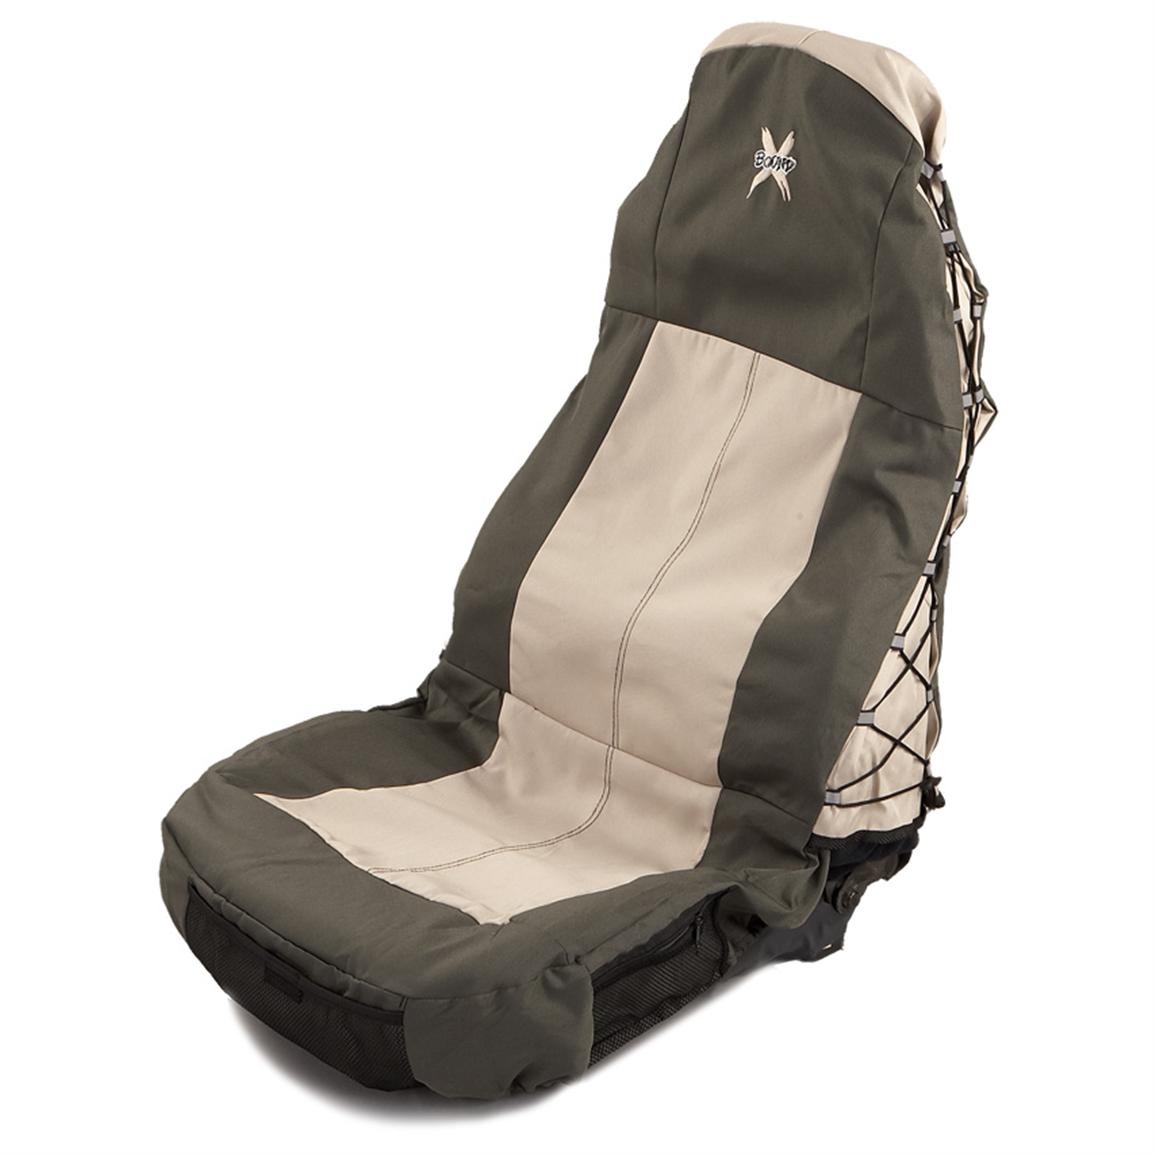 X-Bound Bucket Seat Cover - 75840, Seat Covers at Sportsman's Guide